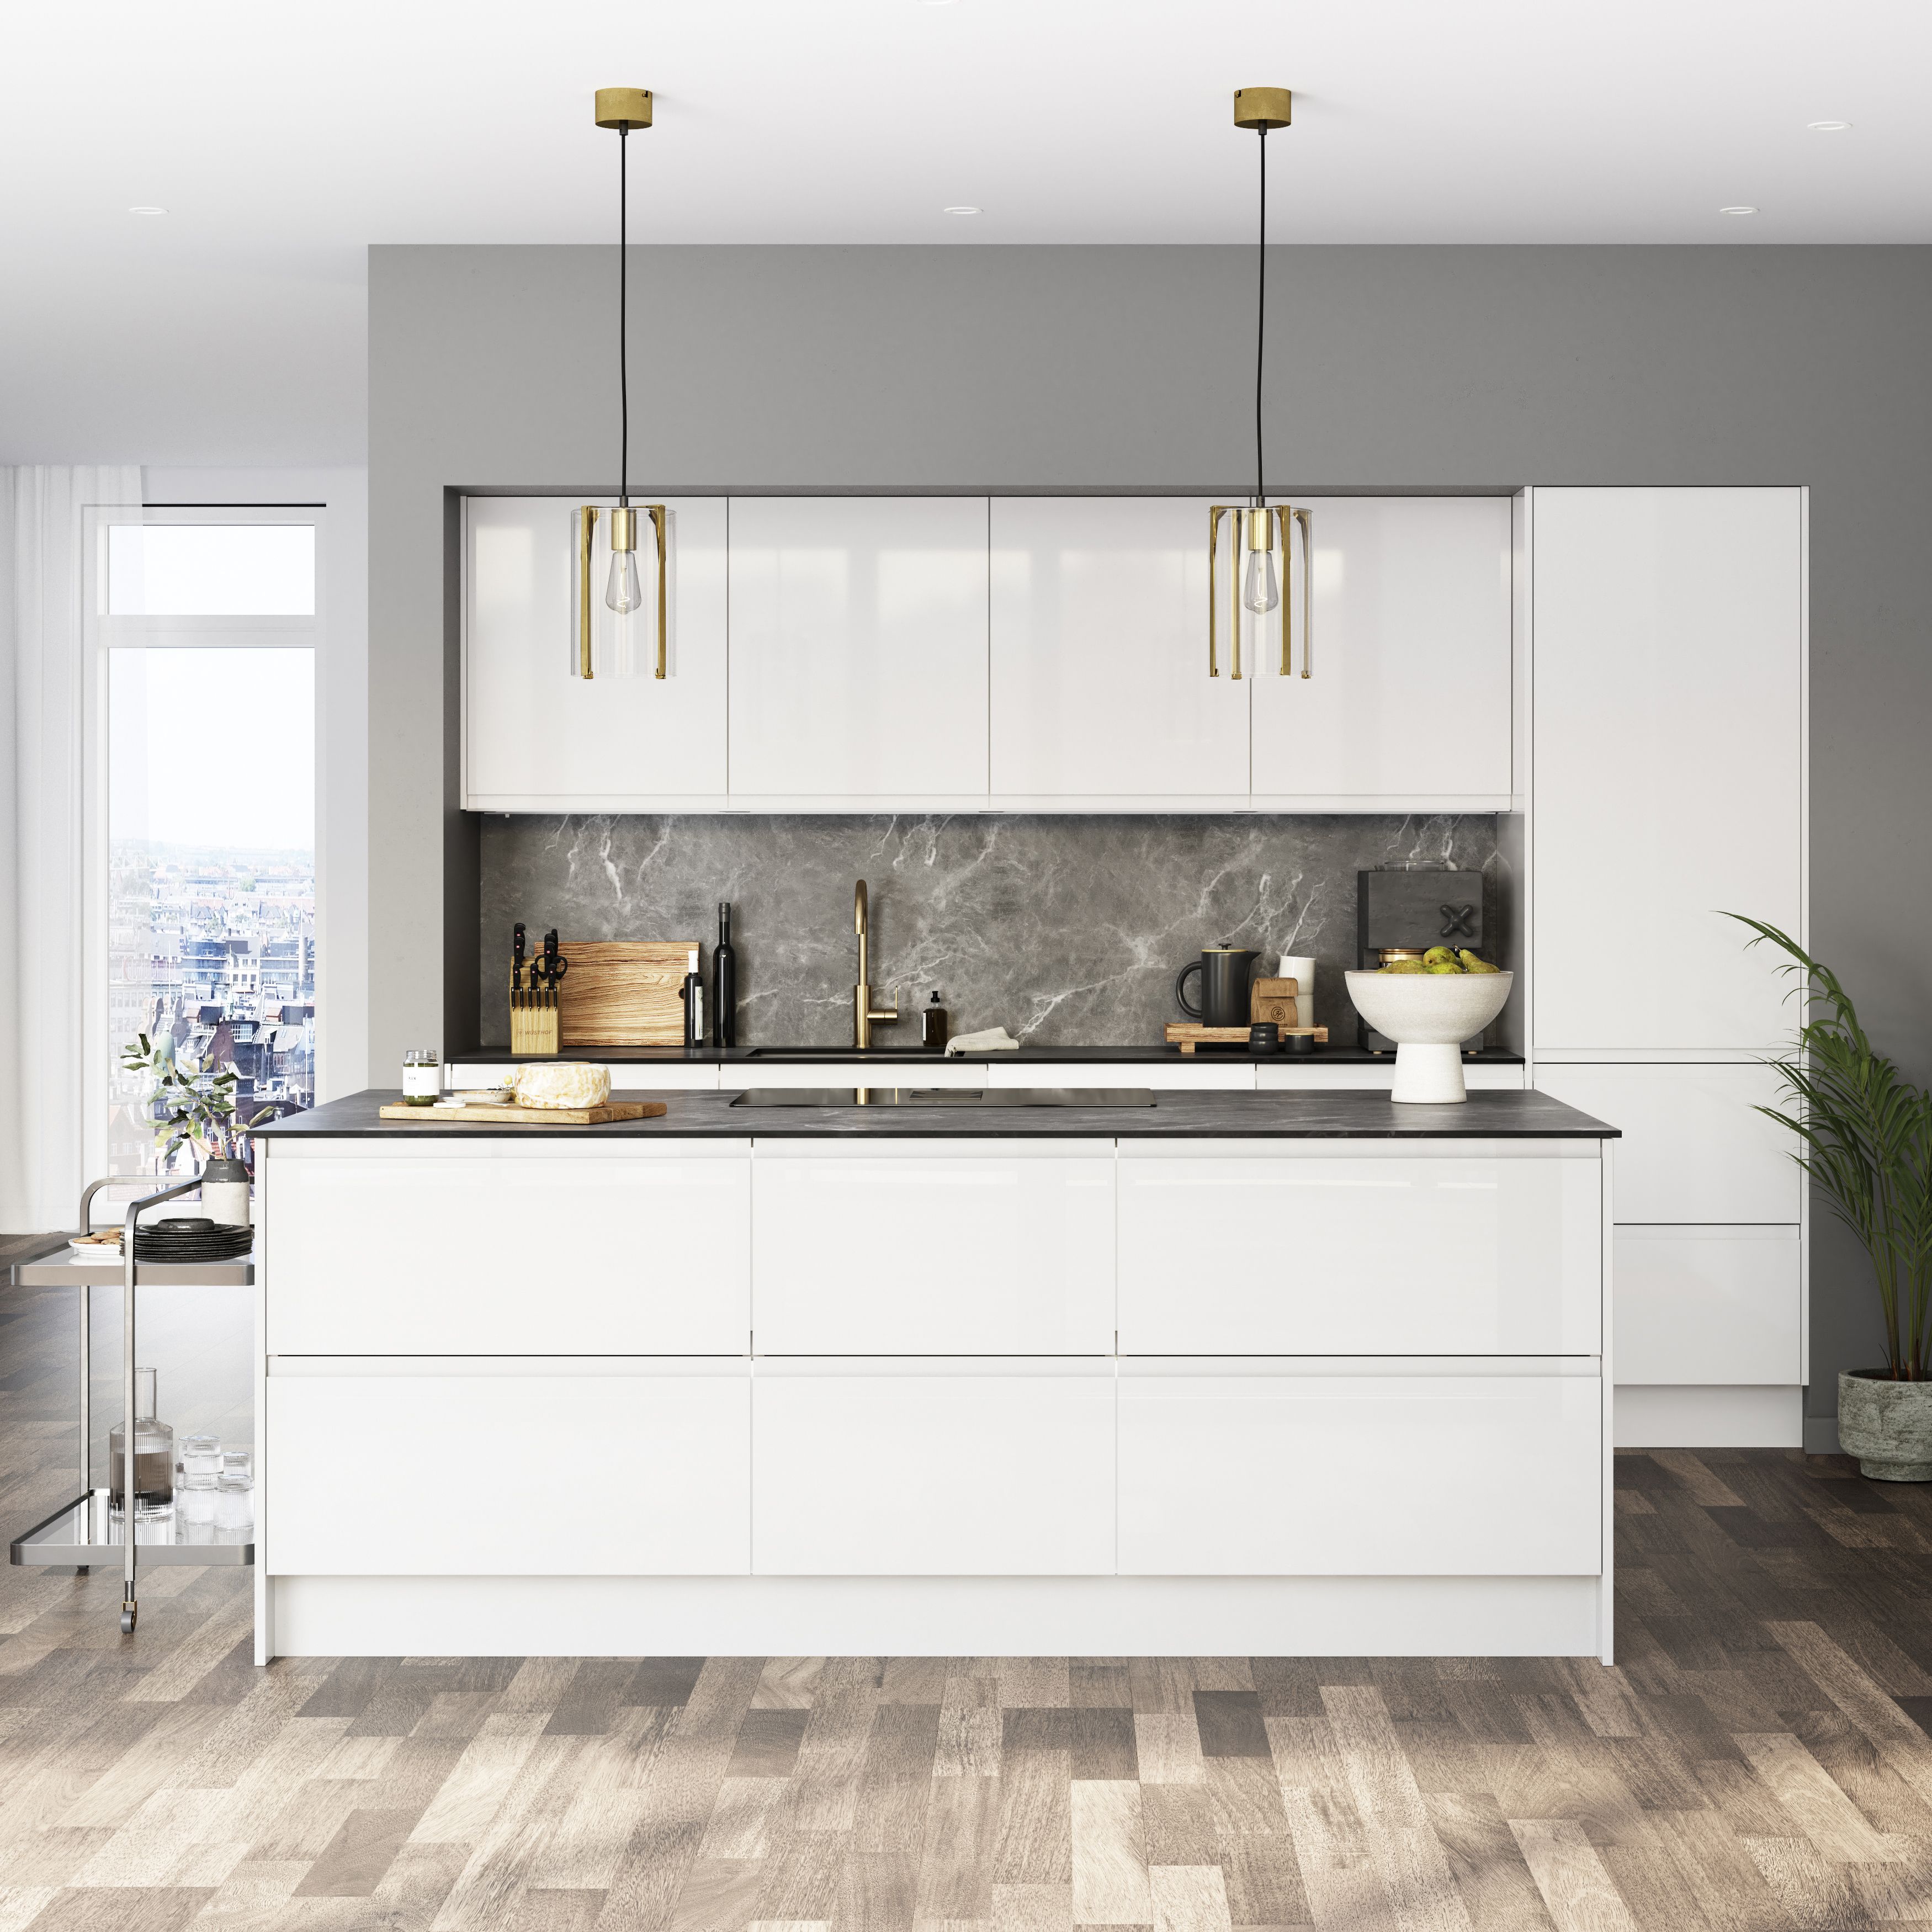 GoodHome Garcinia Gloss light grey integrated handle Base Kitchen cabinet (W)400mm (H)720mm